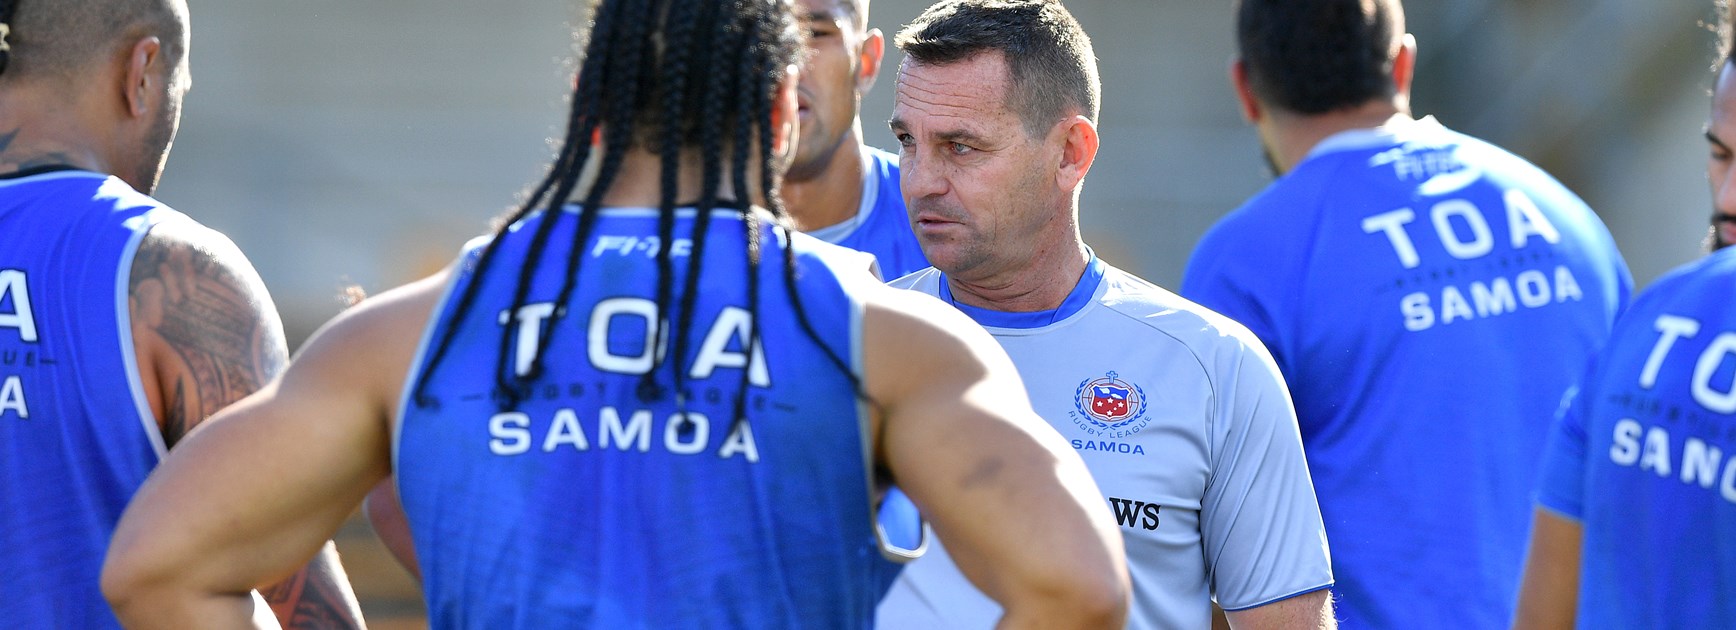 Parish excited about SBW-Johns dream team joining Samoa coaching ranks